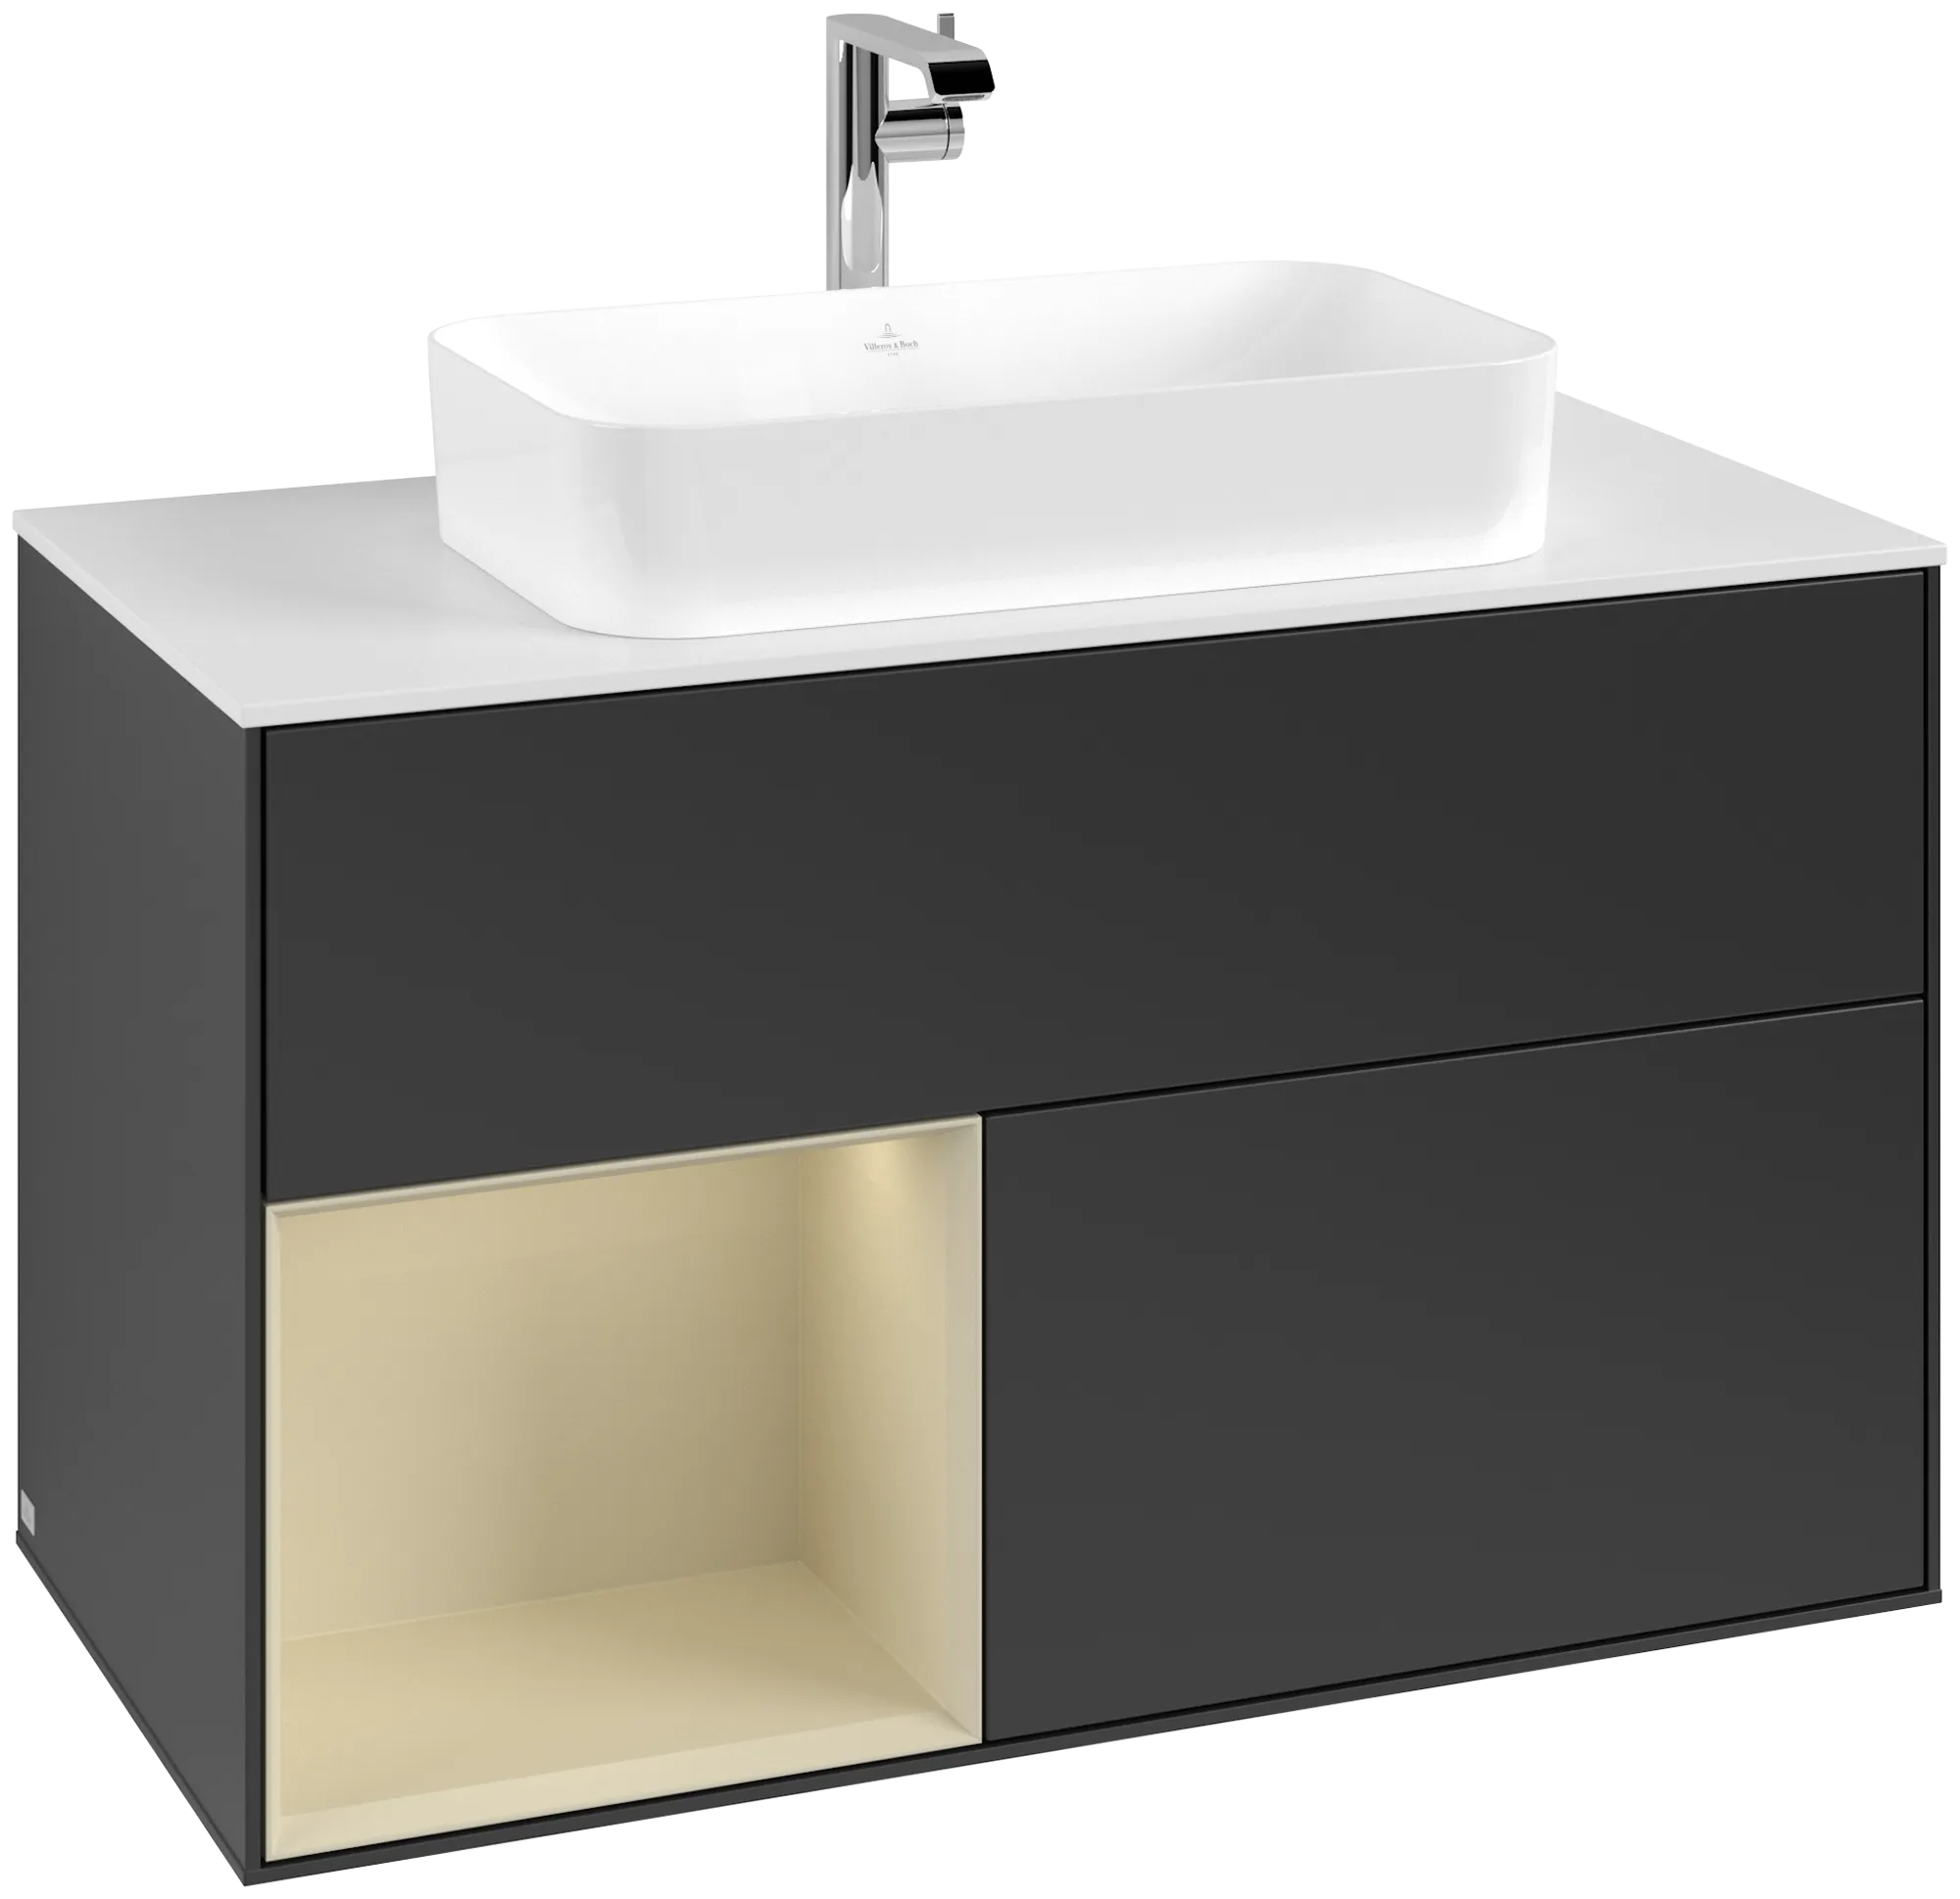 Picture of VILLEROY BOCH Finion Vanity unit, with lighting, 2 pull-out compartments, 1000 x 603 x 501 mm, Black Matt Lacquer / Silk Grey Matt Lacquer / Glass White Matt #G241HJPD